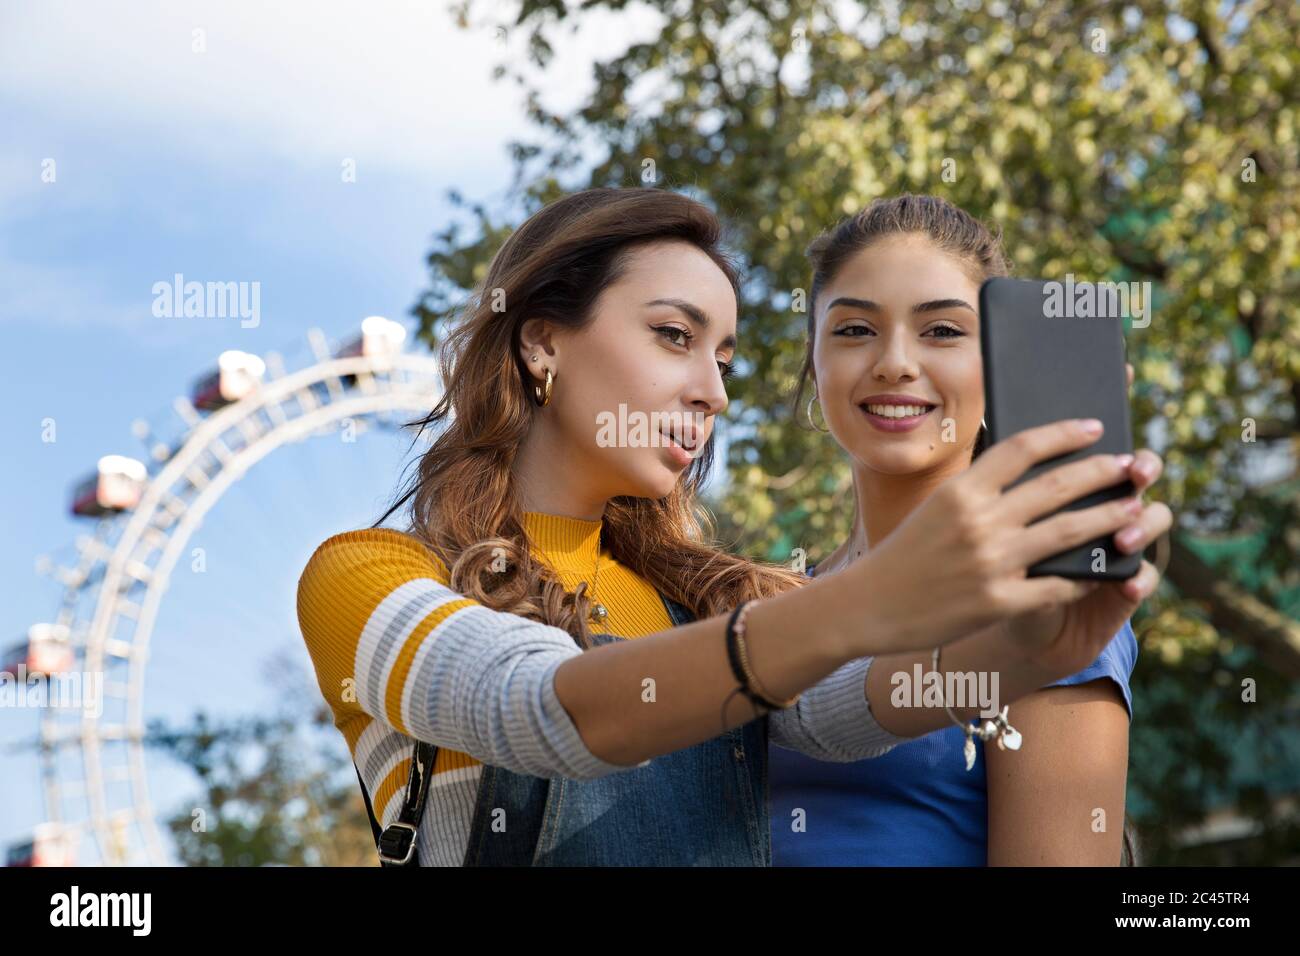 Two young women with long brown hair standing in a park near a Ferris wheel, taking selfie with mobile phone. Stock Photo